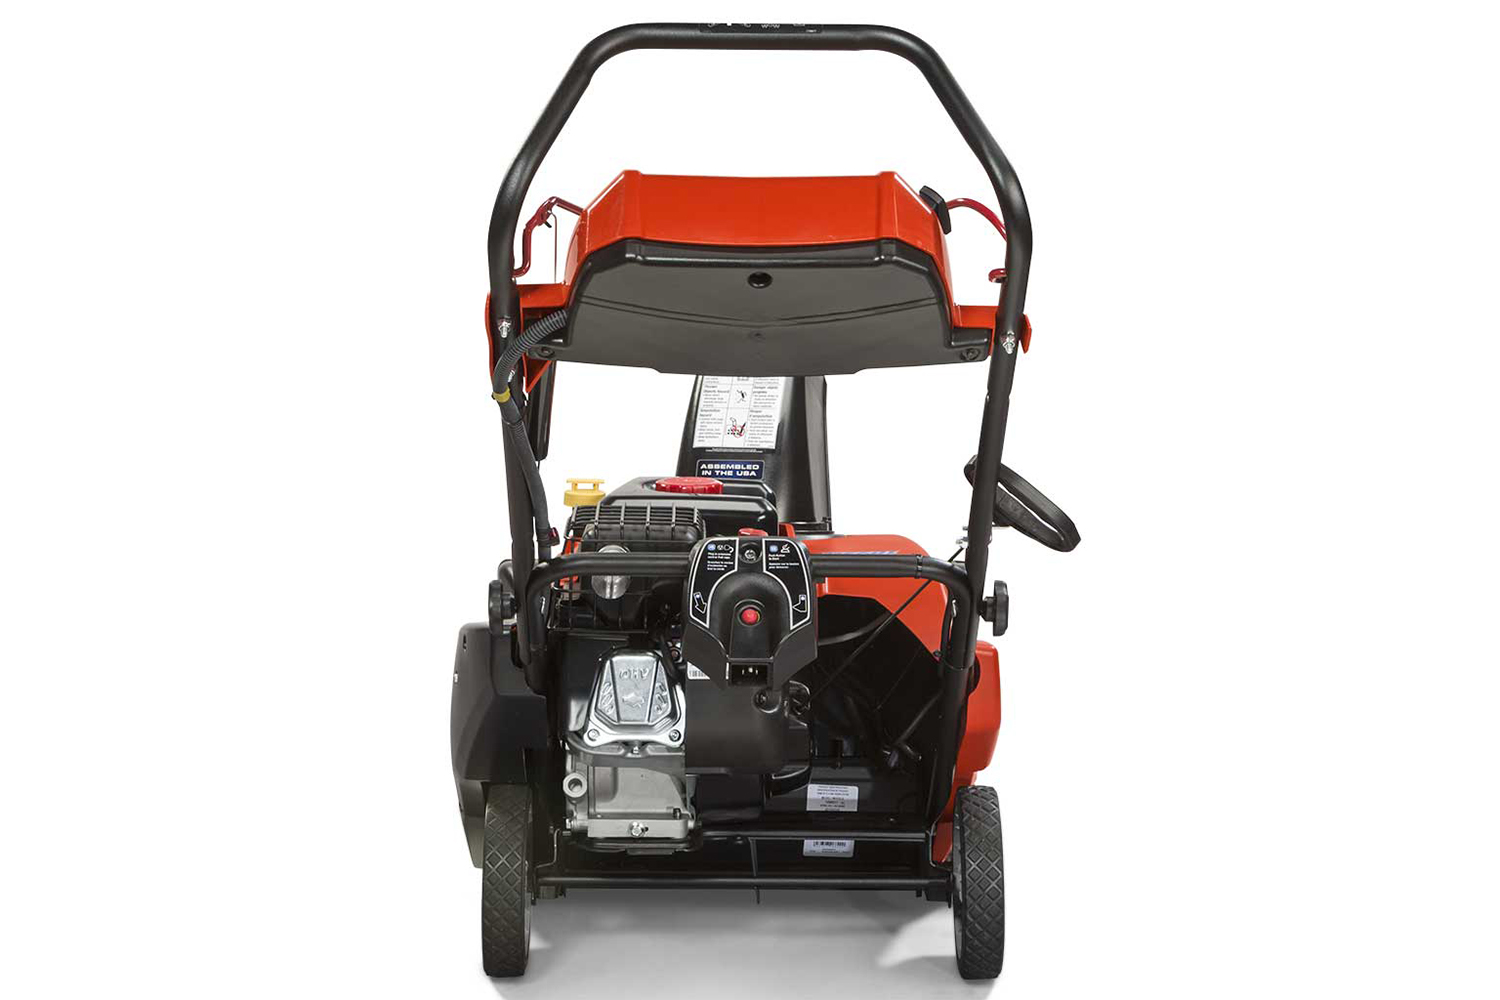 SIMPLICITY SINGLE-STAGE SNOW BLOWER WITH SNOWSHREDDER™ AUGER 1022EE<br/>*Model shown in image may vary.